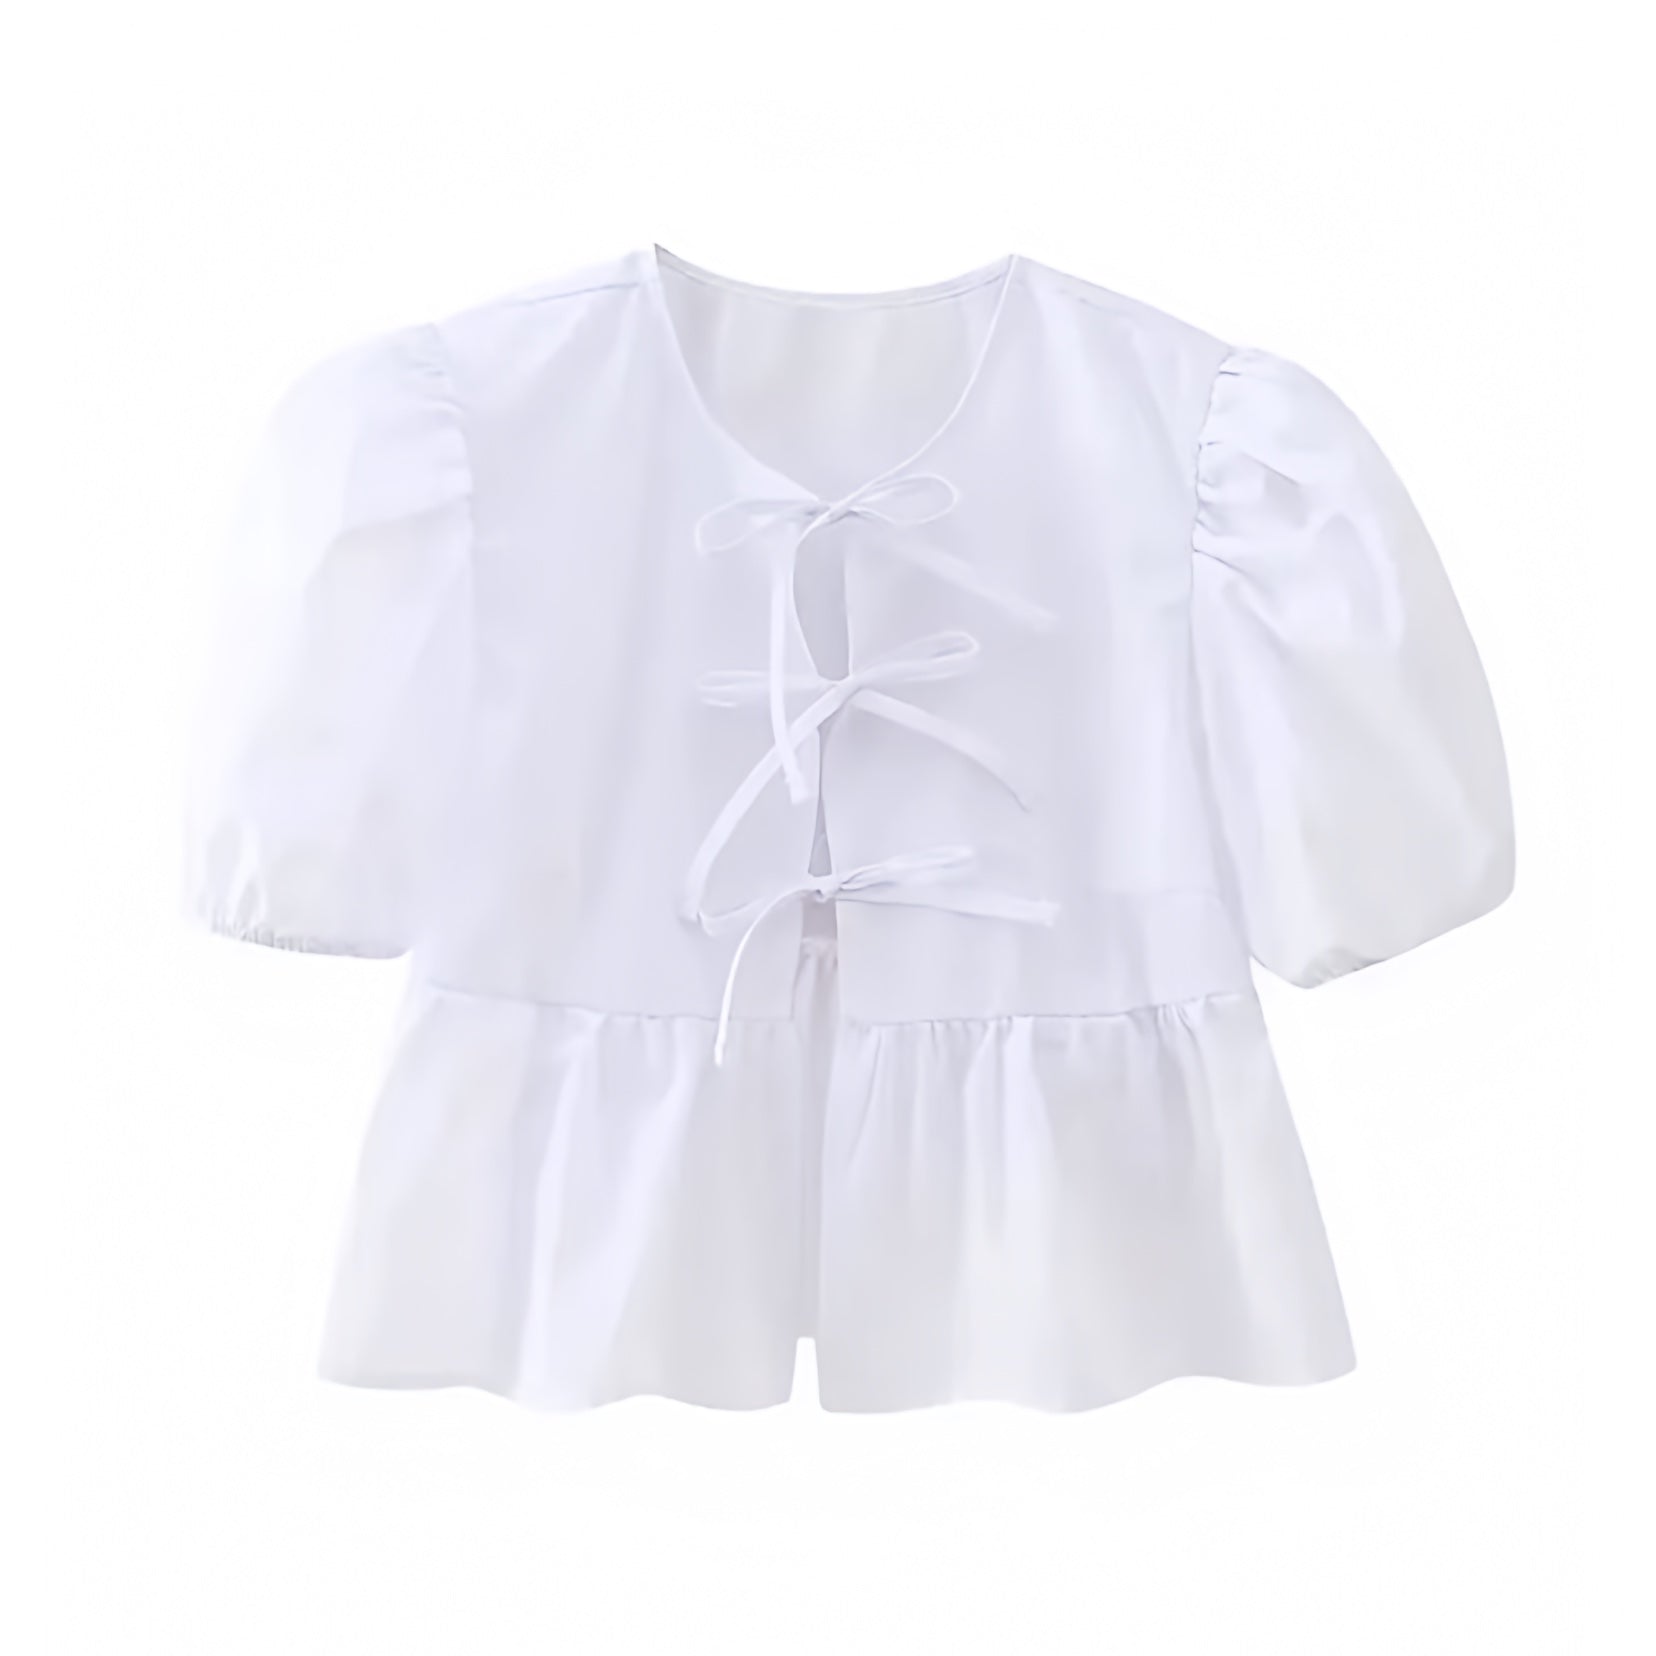 white-ivory-bow-lace-up-round-neck-cut-out-ruffled-short-puff-sleeve-loose-fit-oversized-linen-crop-camisole-top-blouse-t-shirt-baby-tee-women-ladies-chic-trendy-spring-2024-summer-elegant-casual-feminine-preppy-style-coquette-dollette-zara-revolve-aritzia-urban-outfitters-brandy-melville-pacsun-garage-altard-state